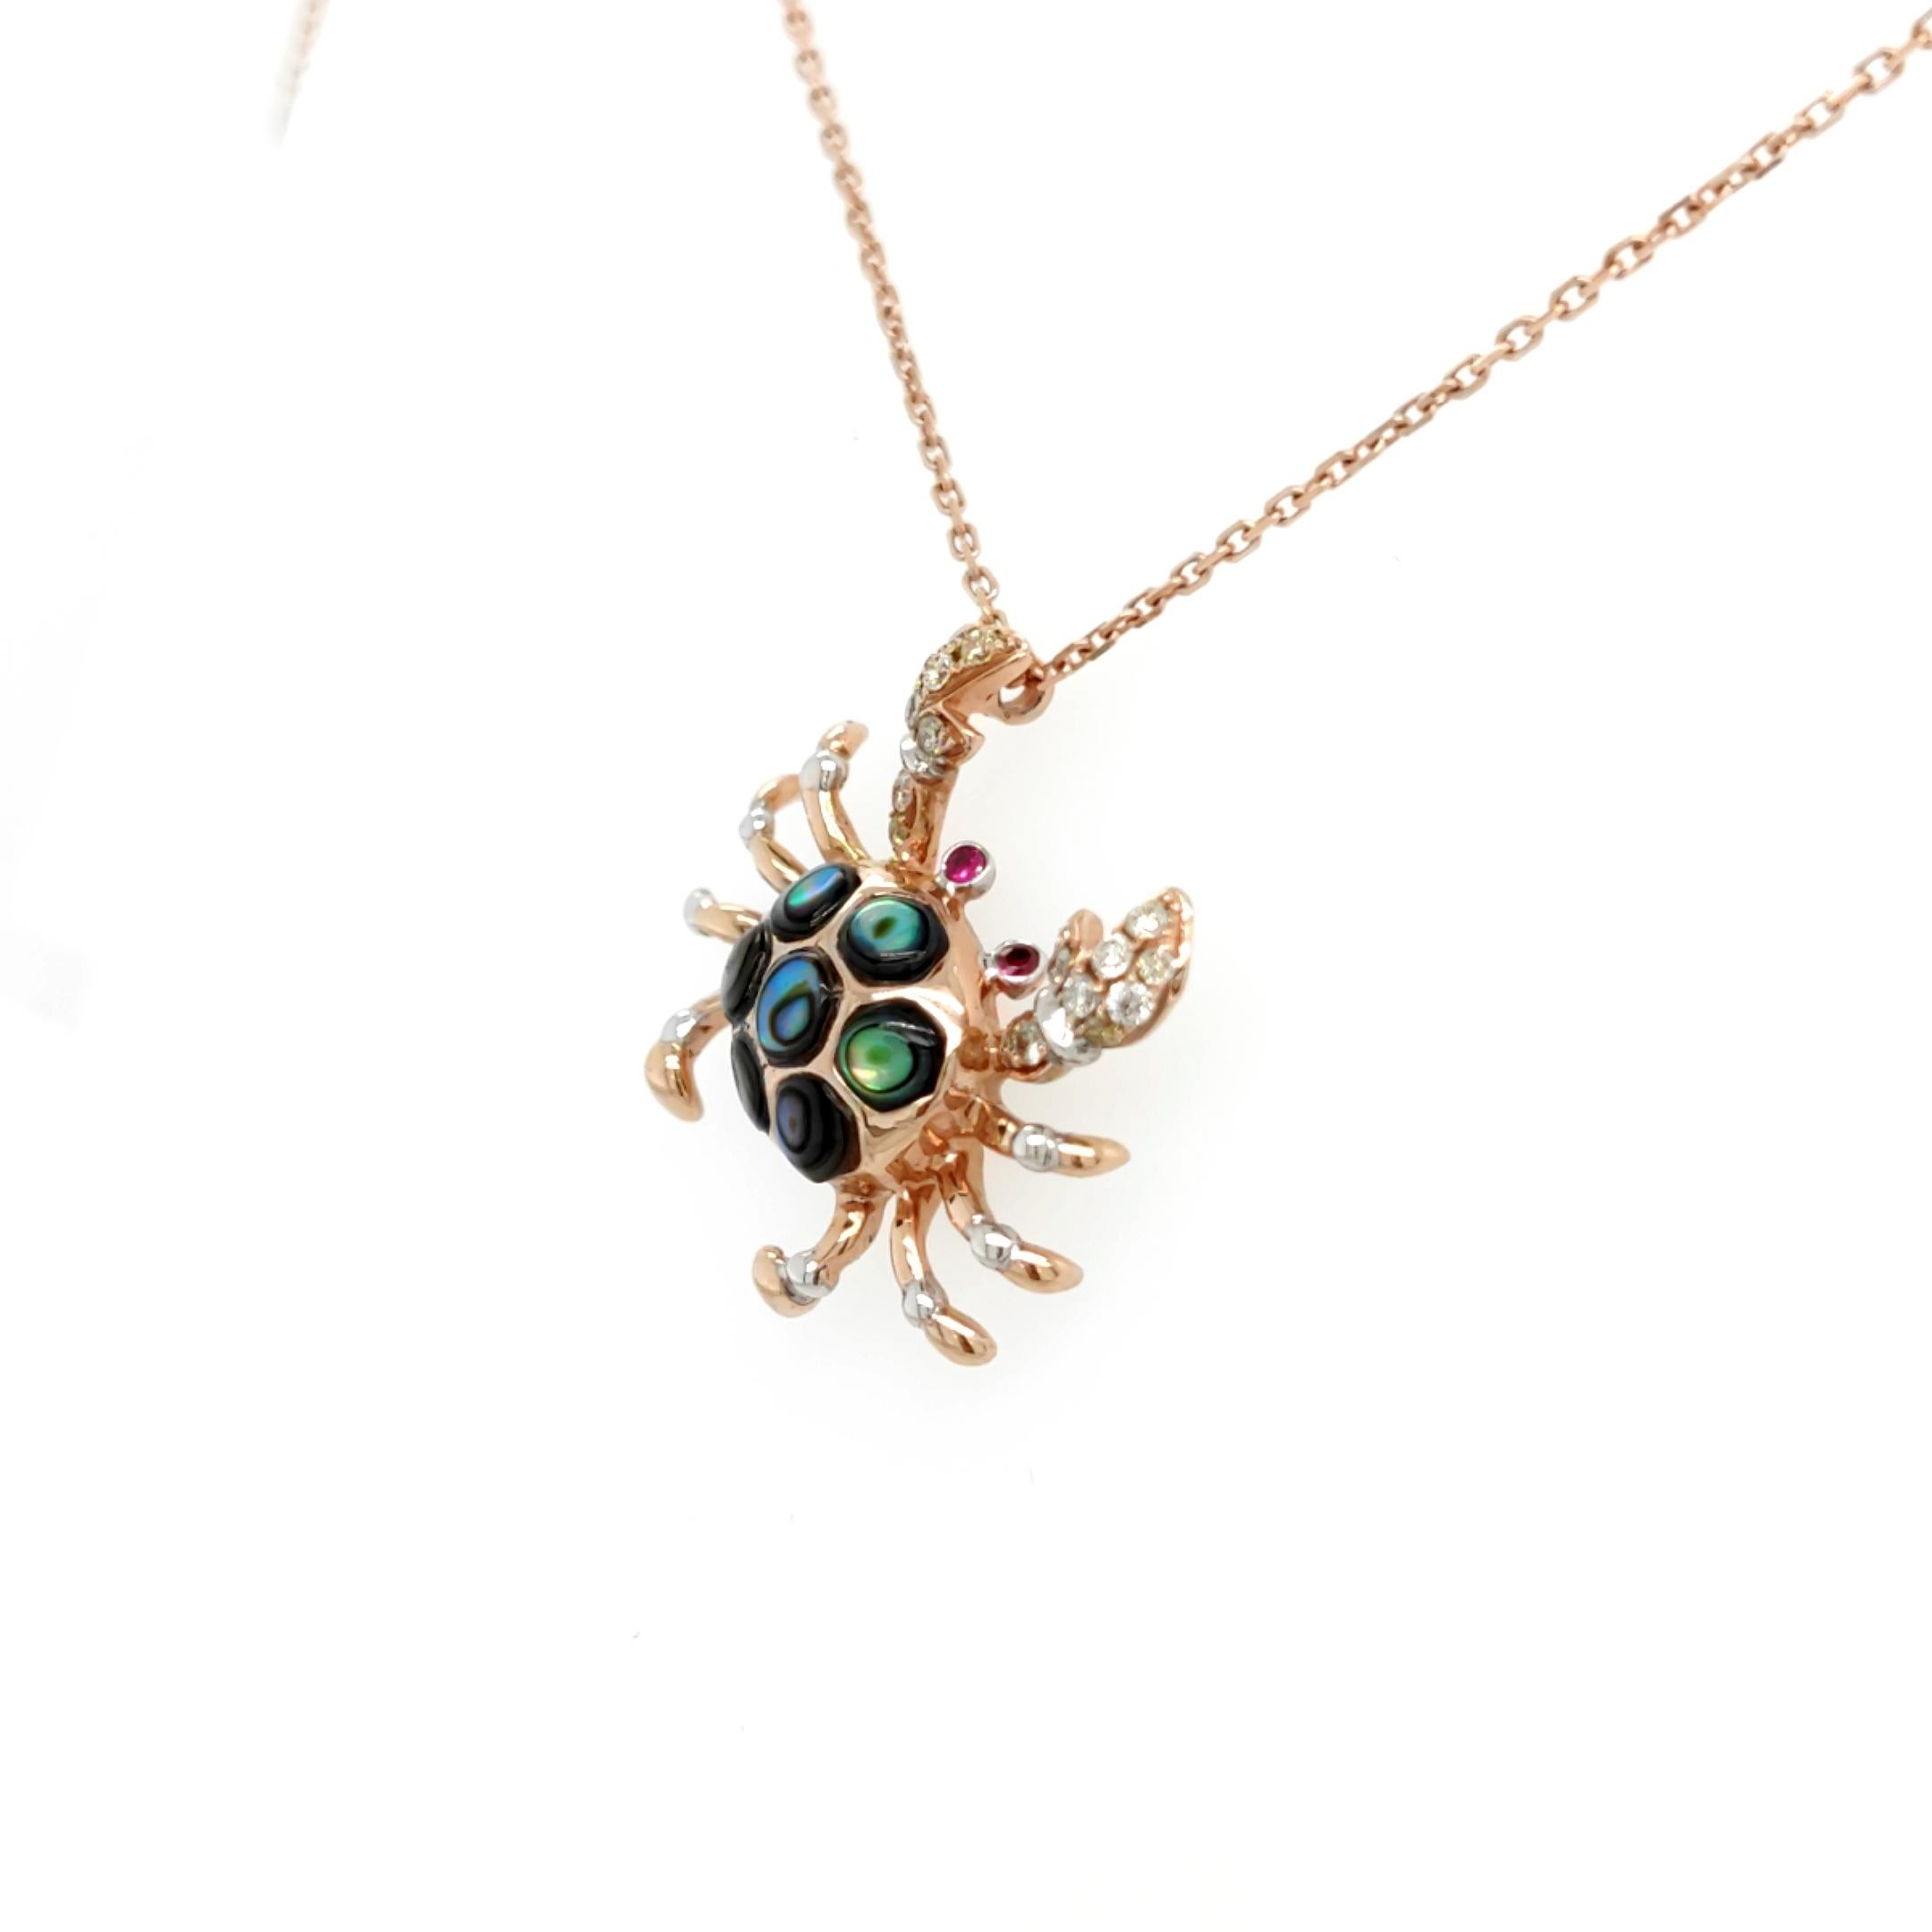 18K Rose Gold Crab Diamond Pendant Necklace with Rubies
Length: 16.5